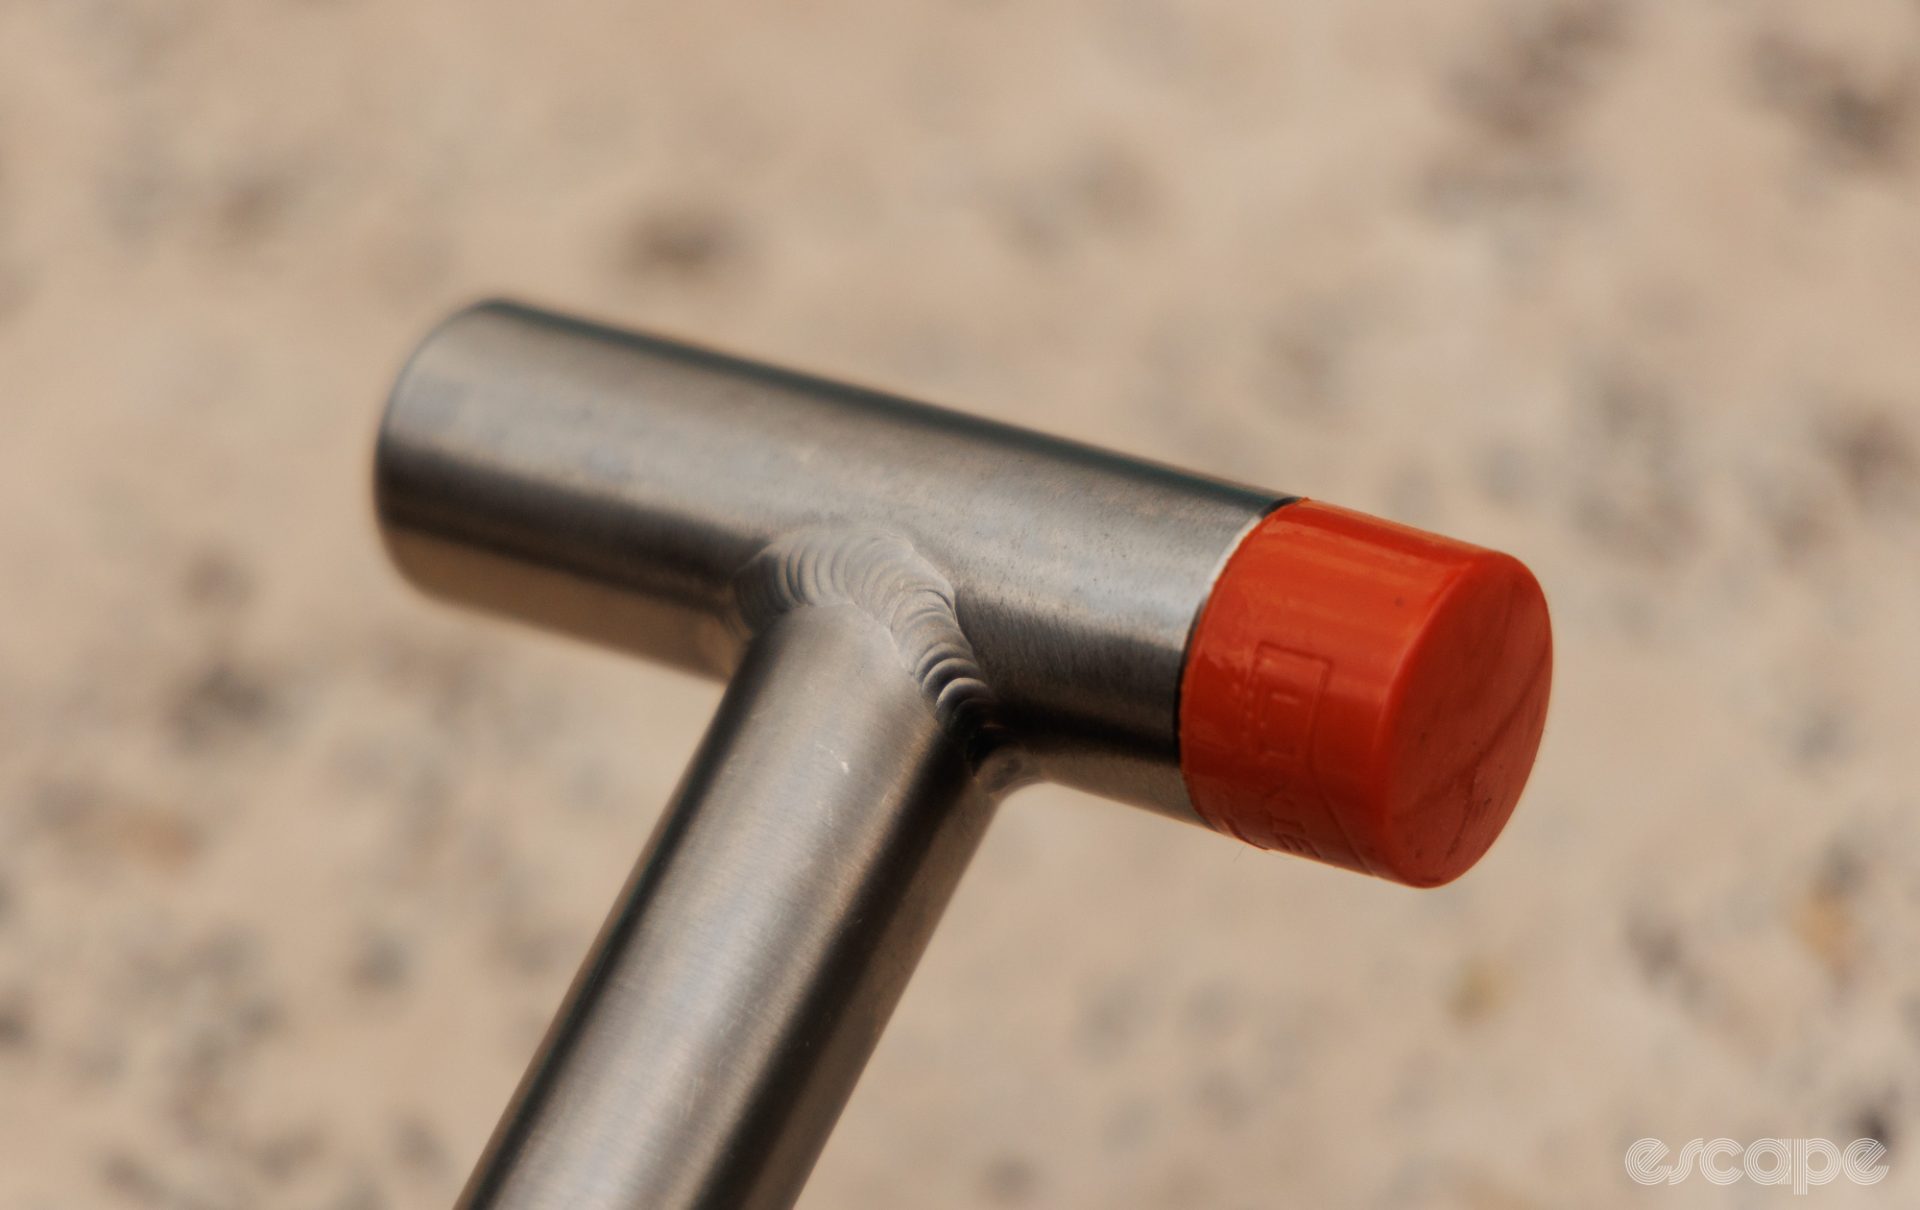 Another close up, showing the weld and soft rubber face of the Rollingdale hammer. 